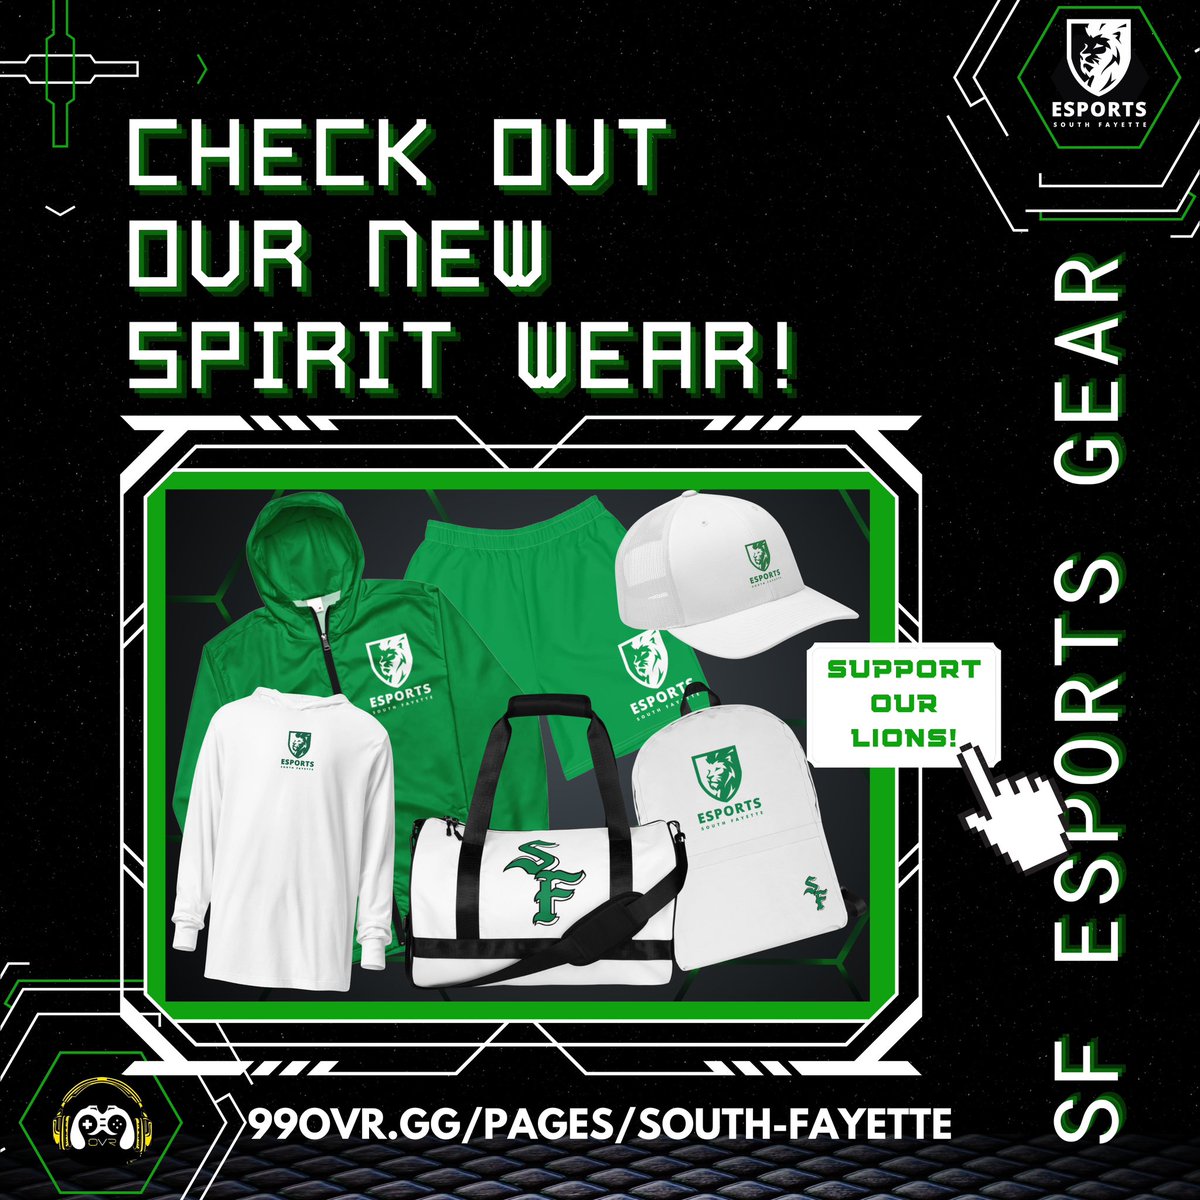 New SF Esports Spirit Gear has been added to our collection just in time for Spring! Check out the new items and help support our program! 99ovr.gg/pages/south-fa… #SFLionPride @99ovrgg